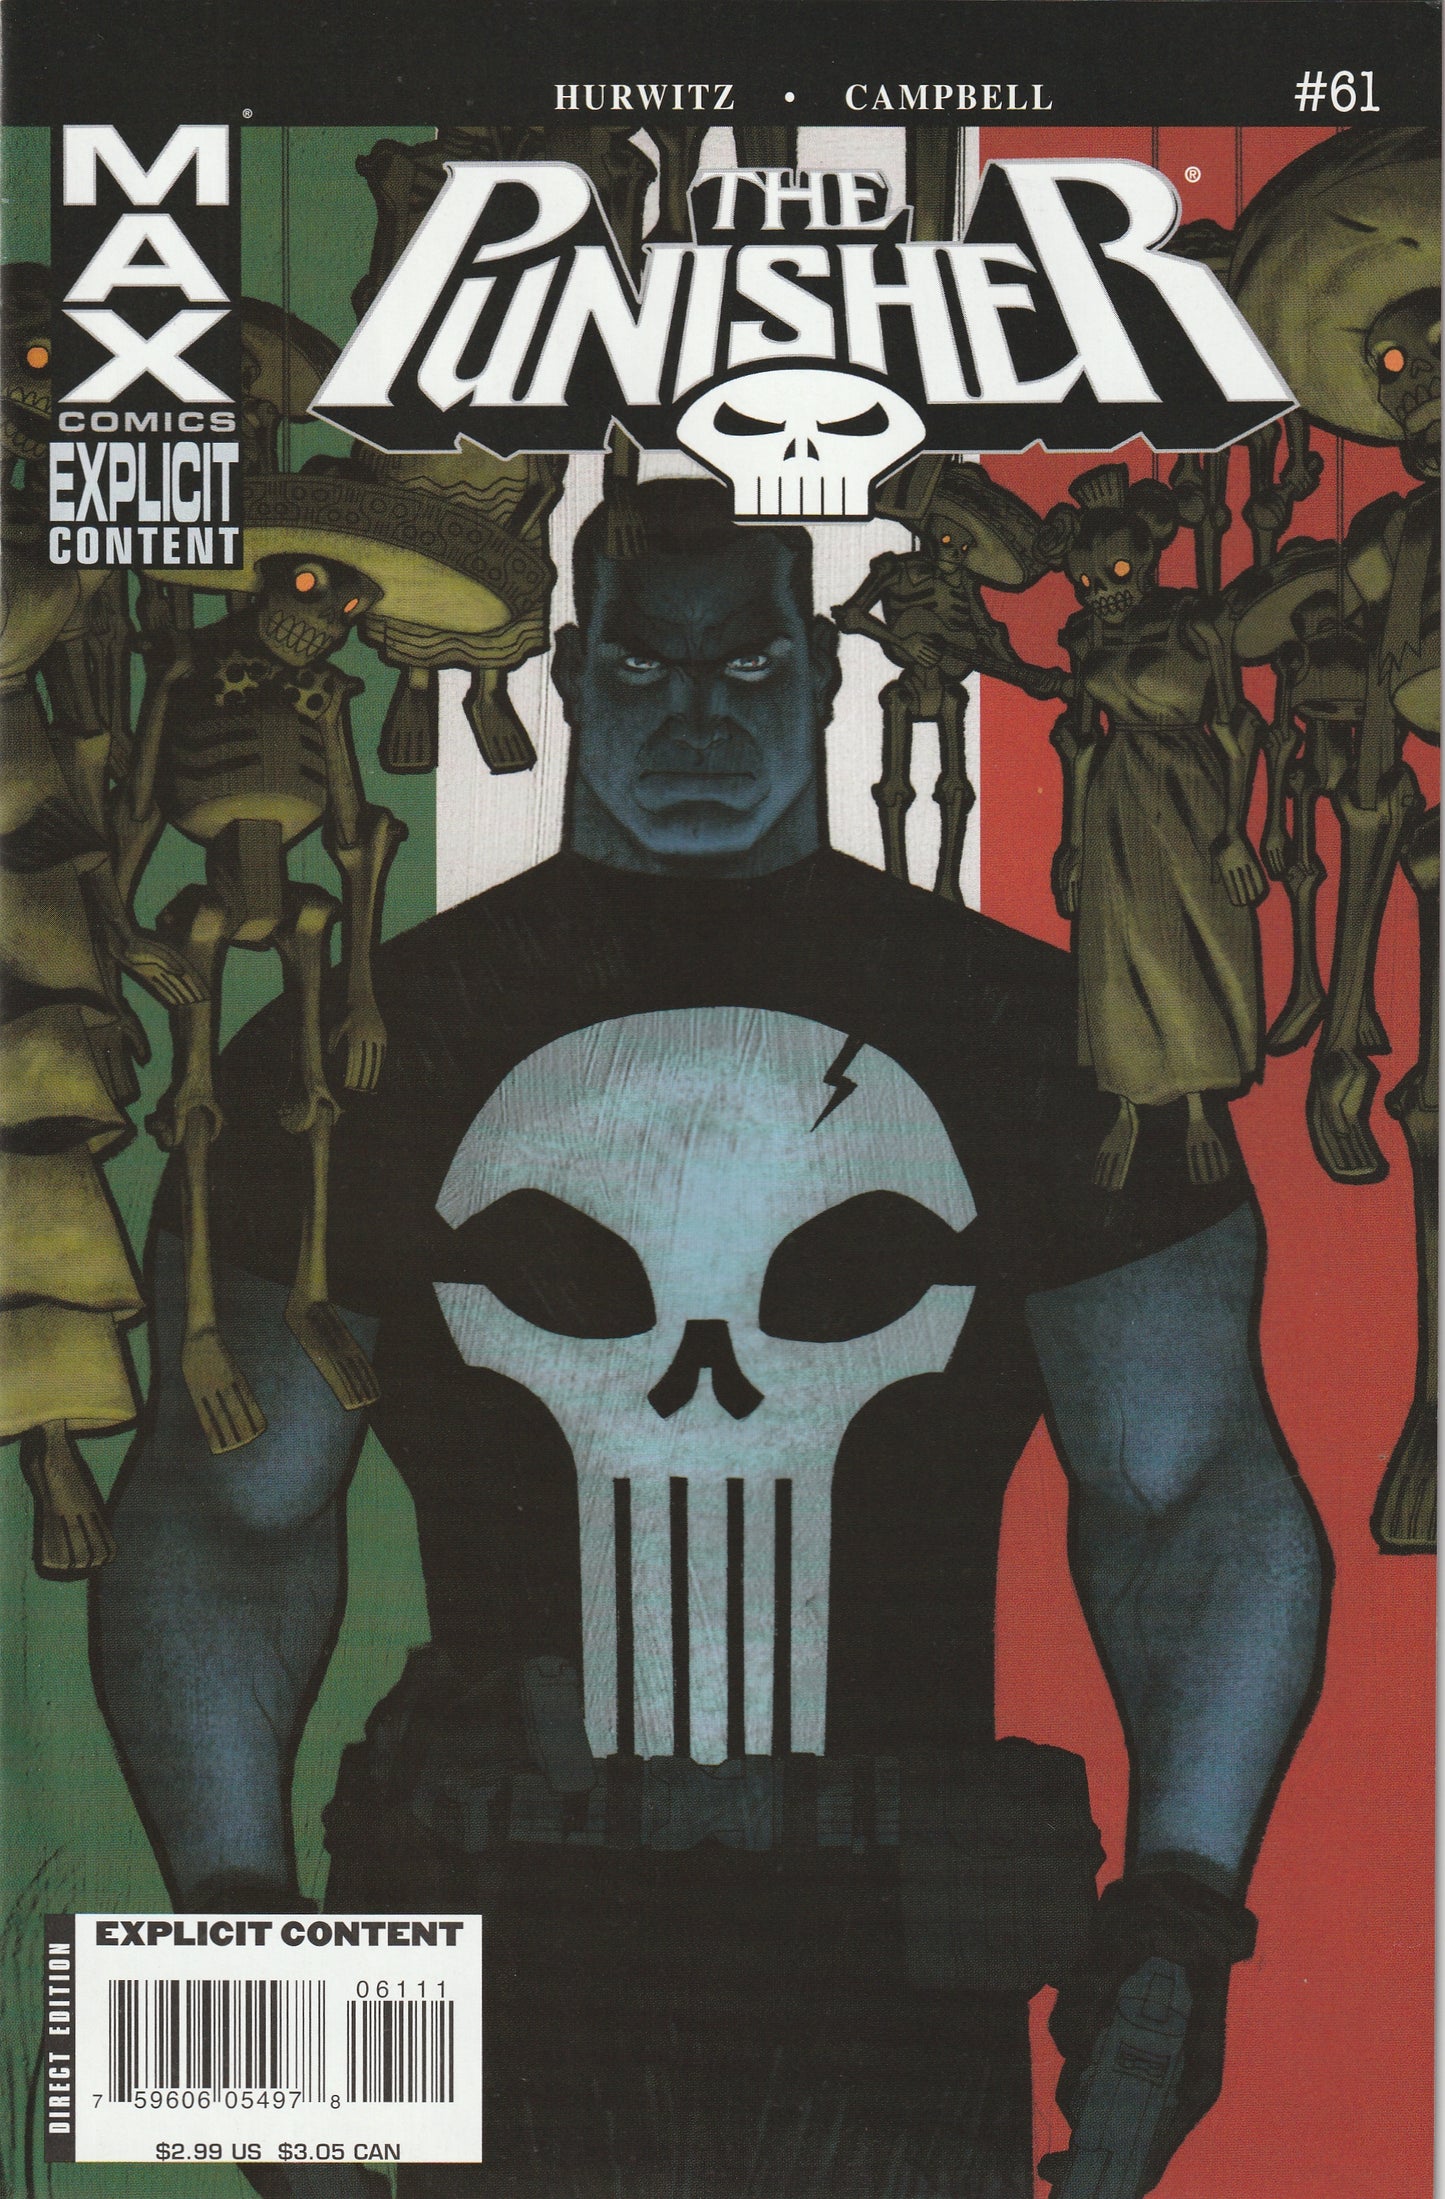 The Punisher #61 (MAX, 2008)